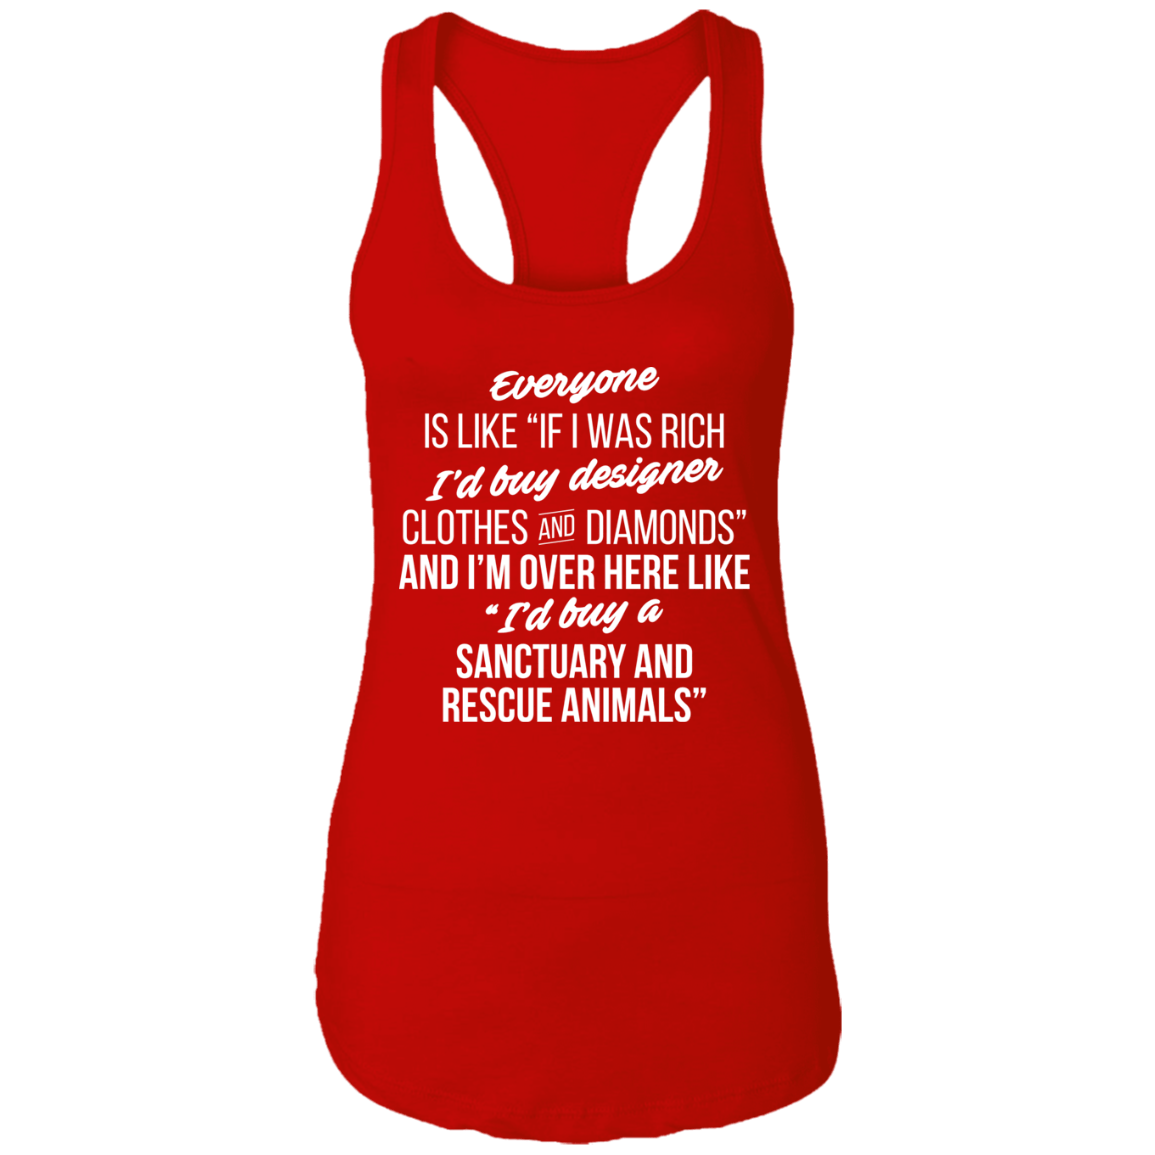 If I Was Rich - Ladies Racer Back Tank.